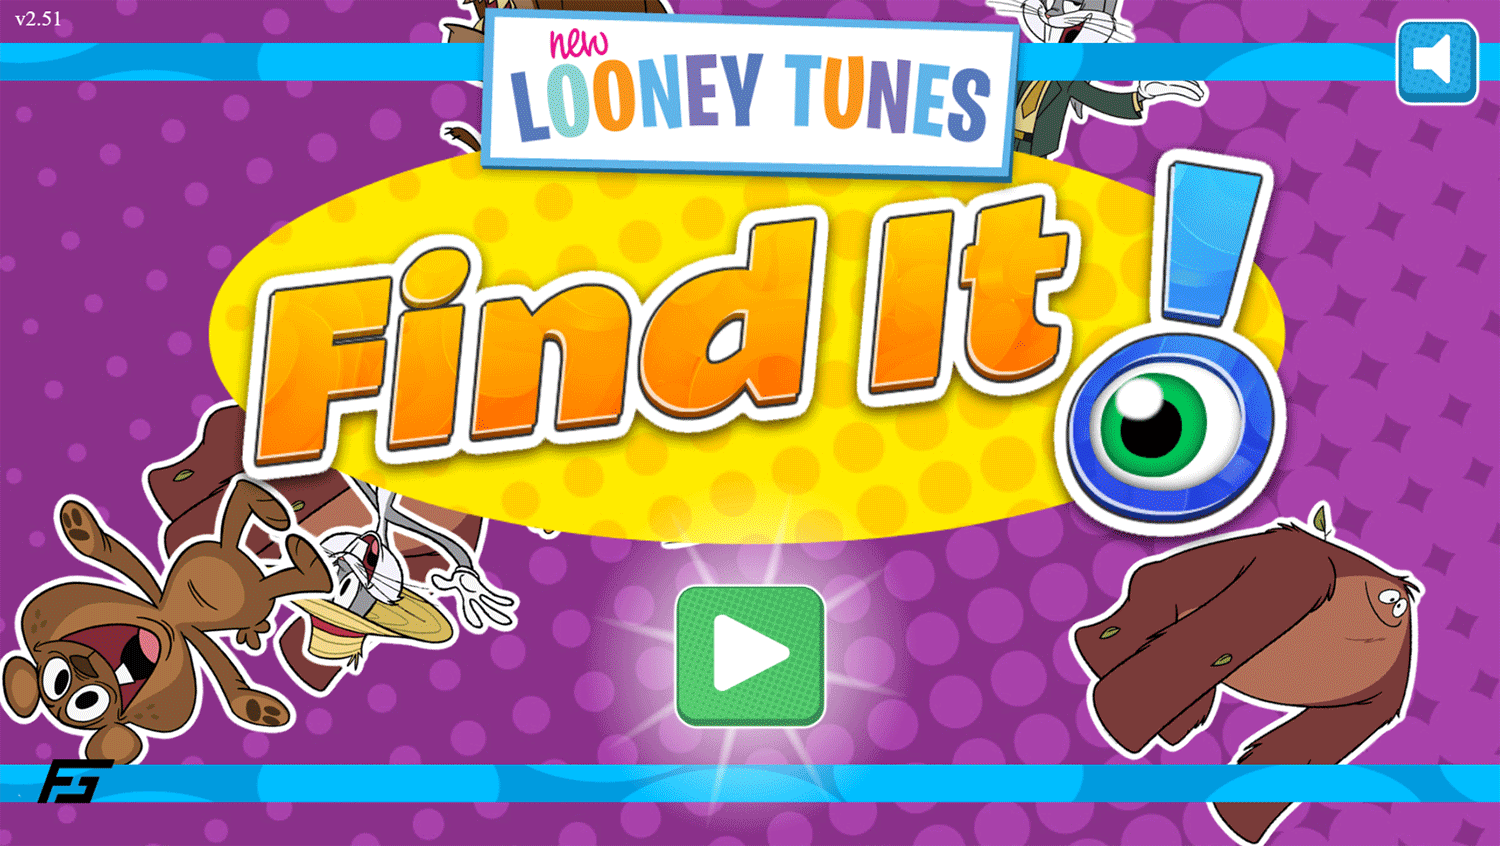 New Looney Tunes Find It Game Welcome Screen Screenshot.